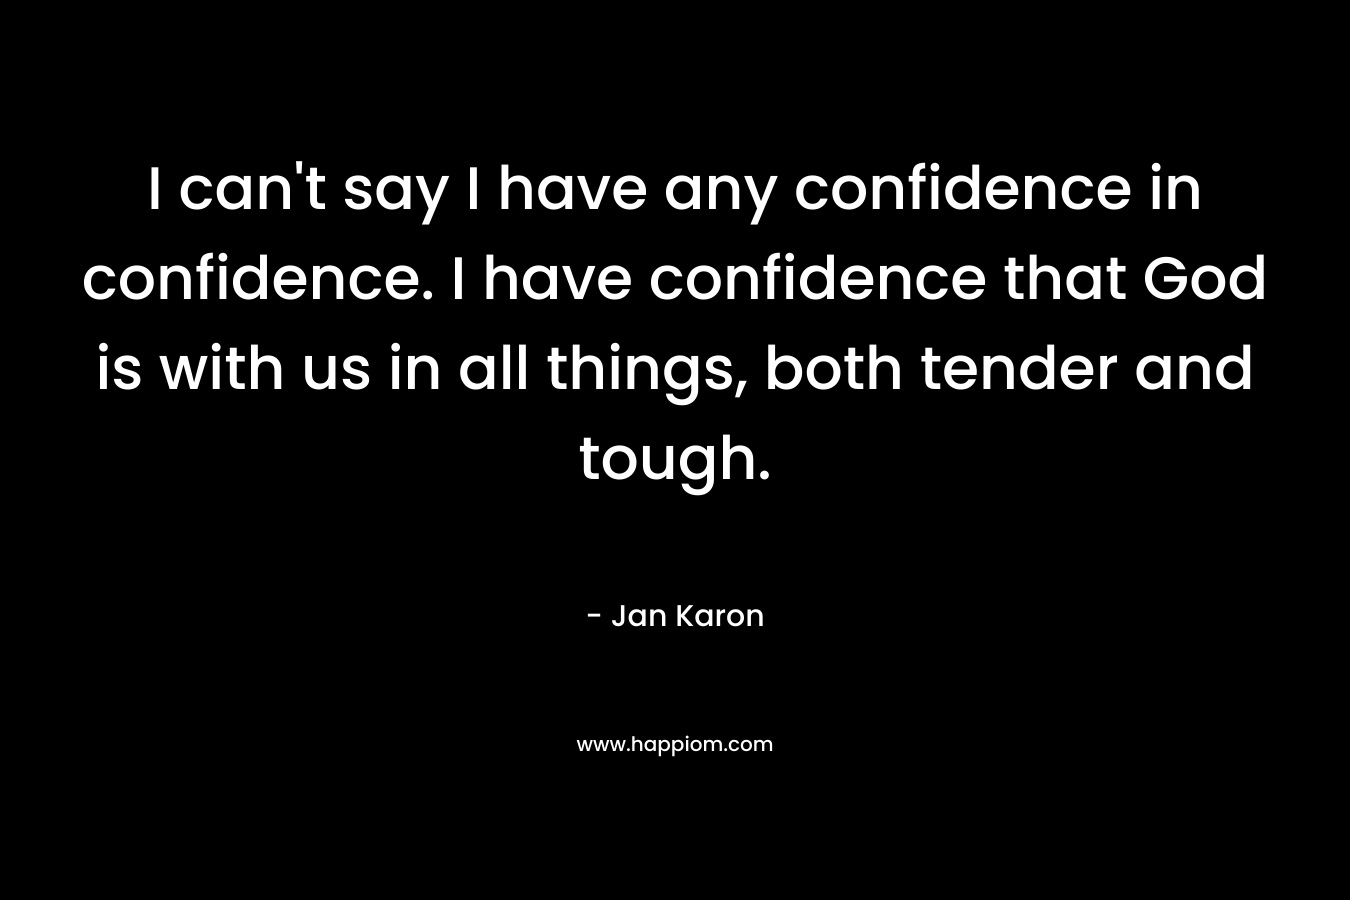 I can’t say I have any confidence in confidence. I have confidence that God is with us in all things, both tender and tough. – Jan Karon